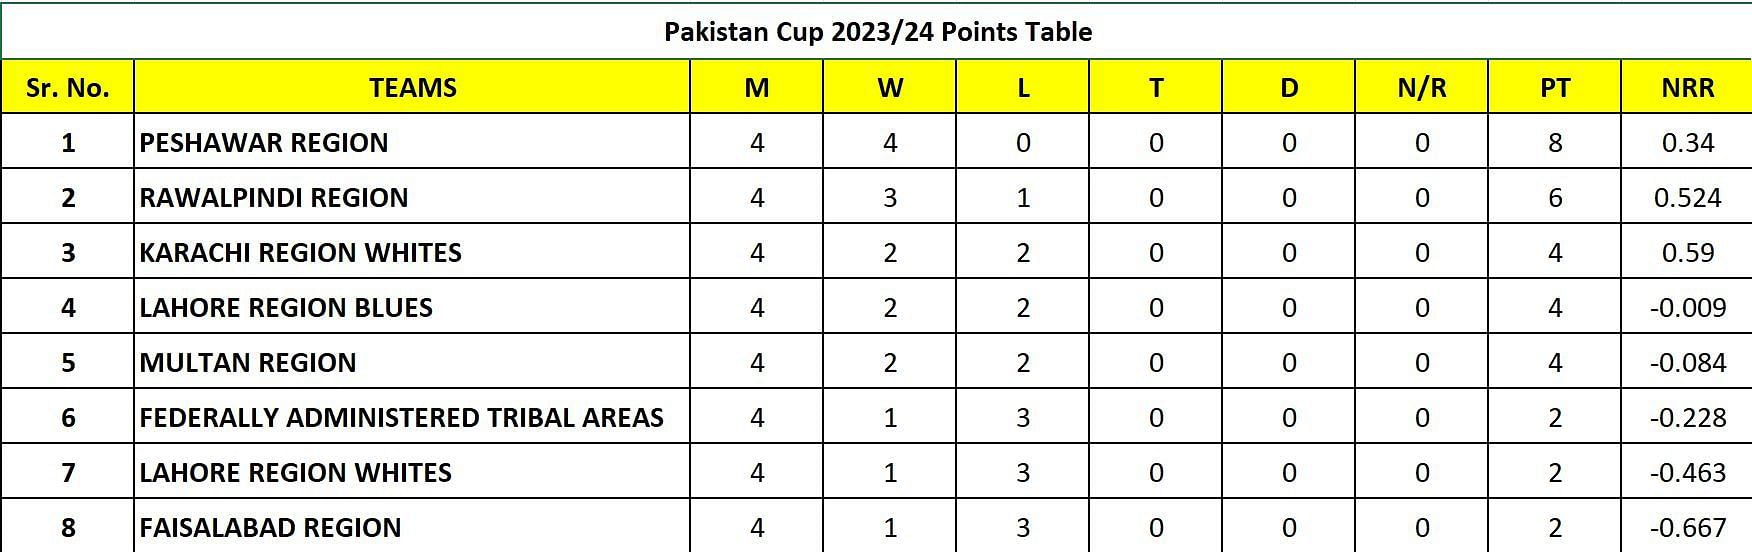 Pakistan Cup 2023/24 Points Table									